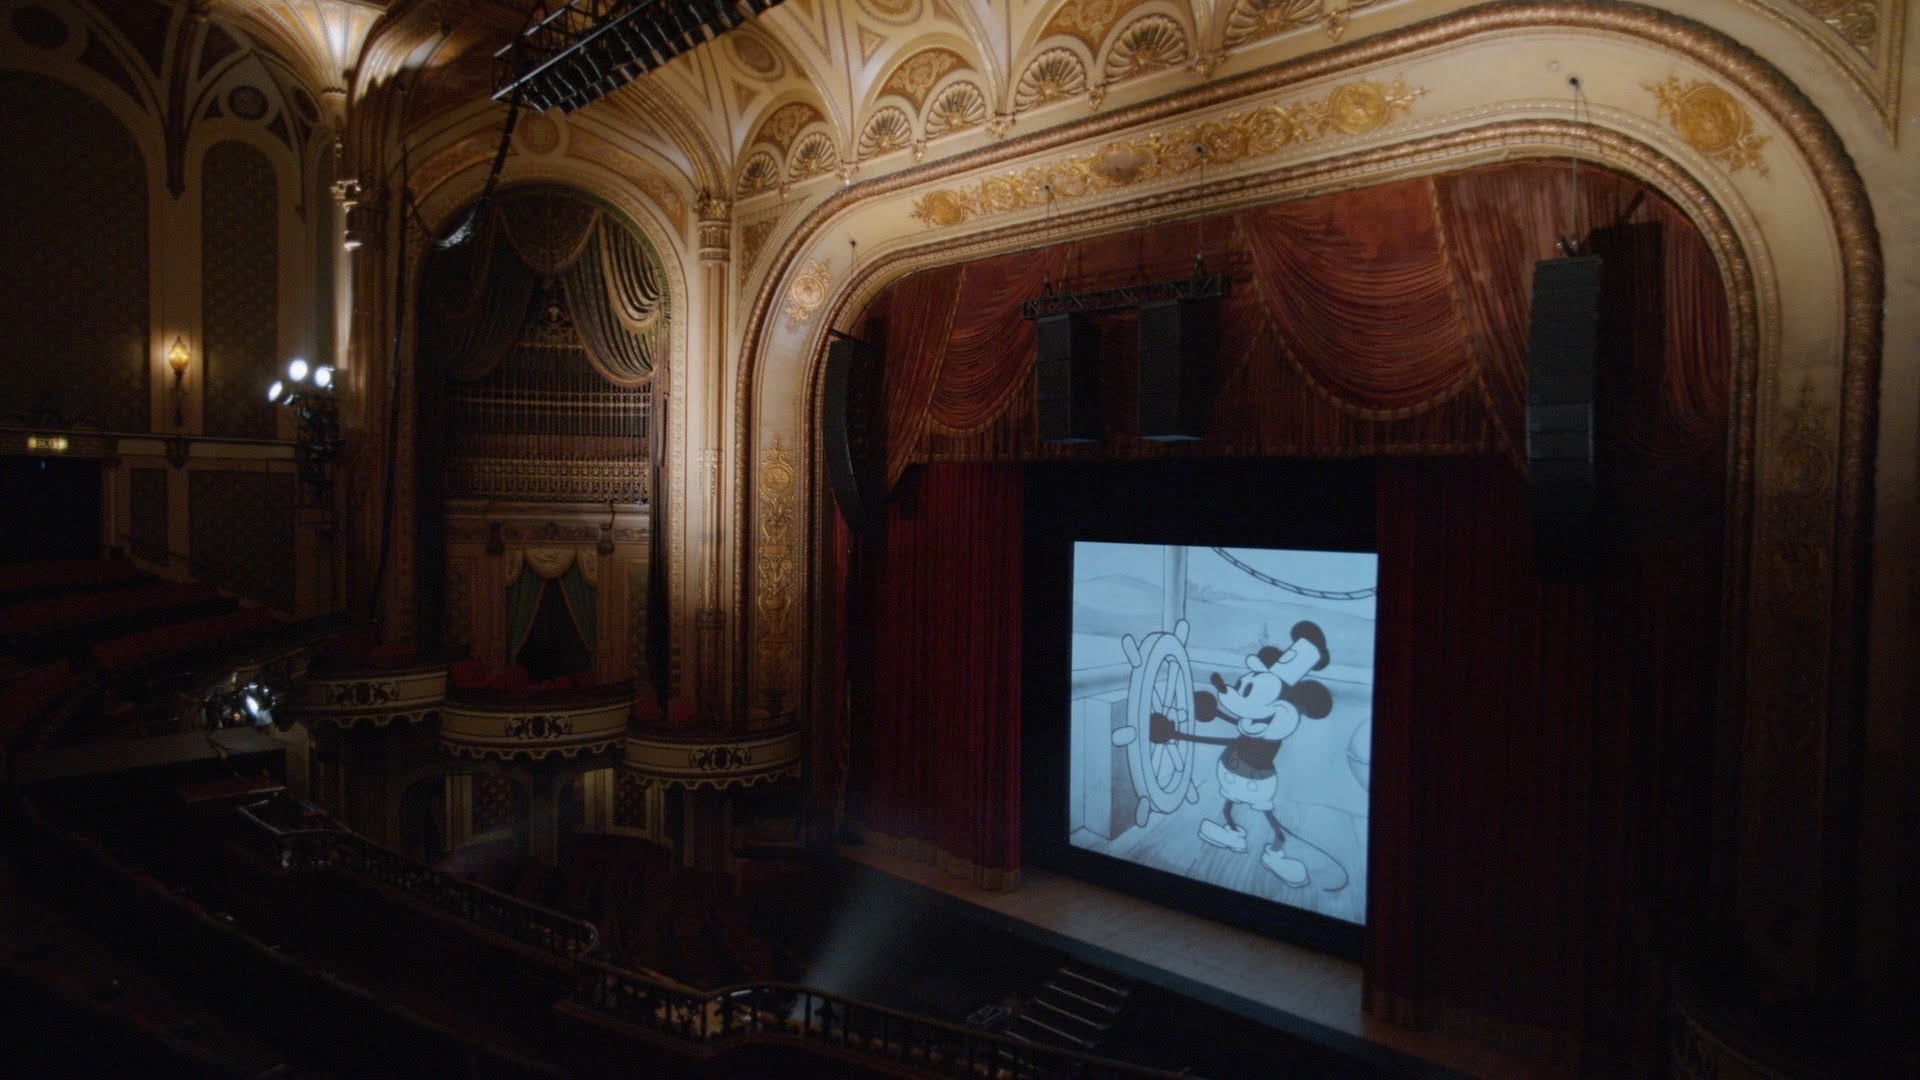 Steamboat Willie plays on the big screen.